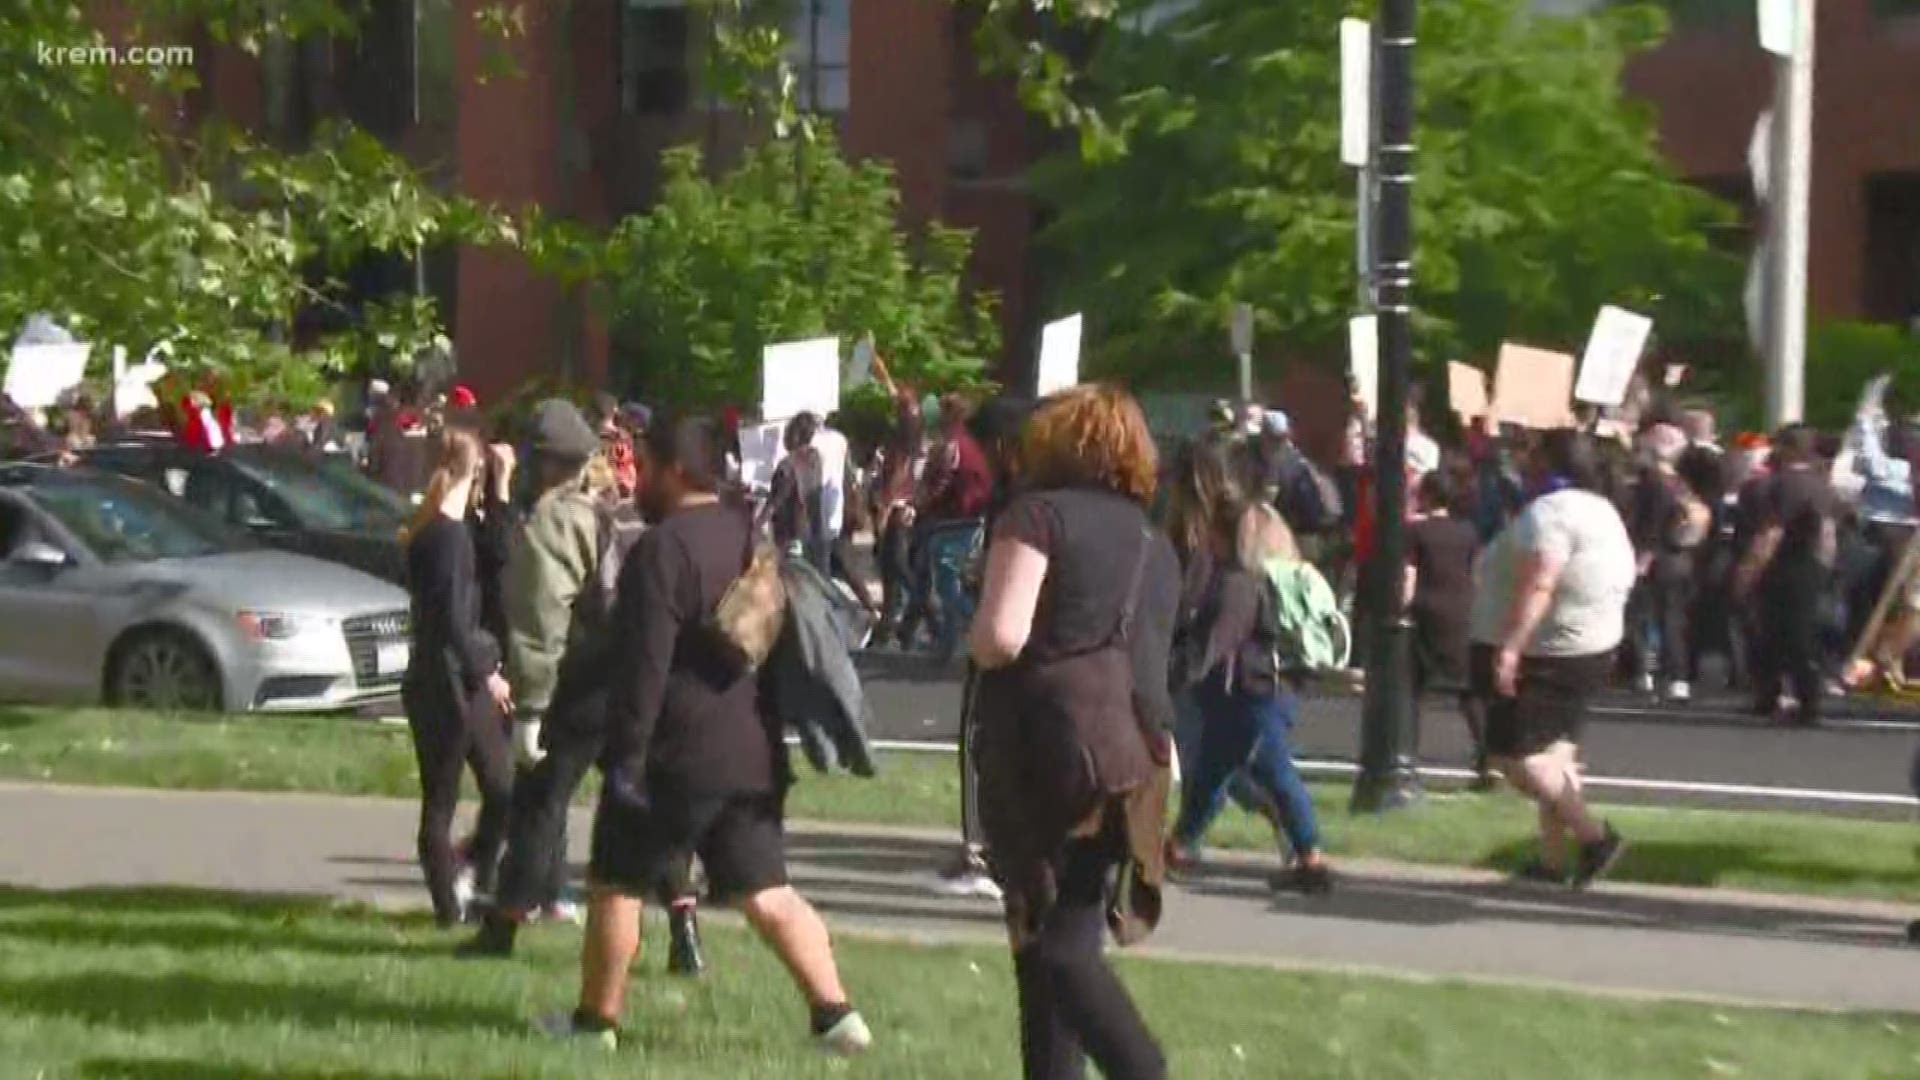 A crowd of protesters continues to march down streets in downtown Spokane.